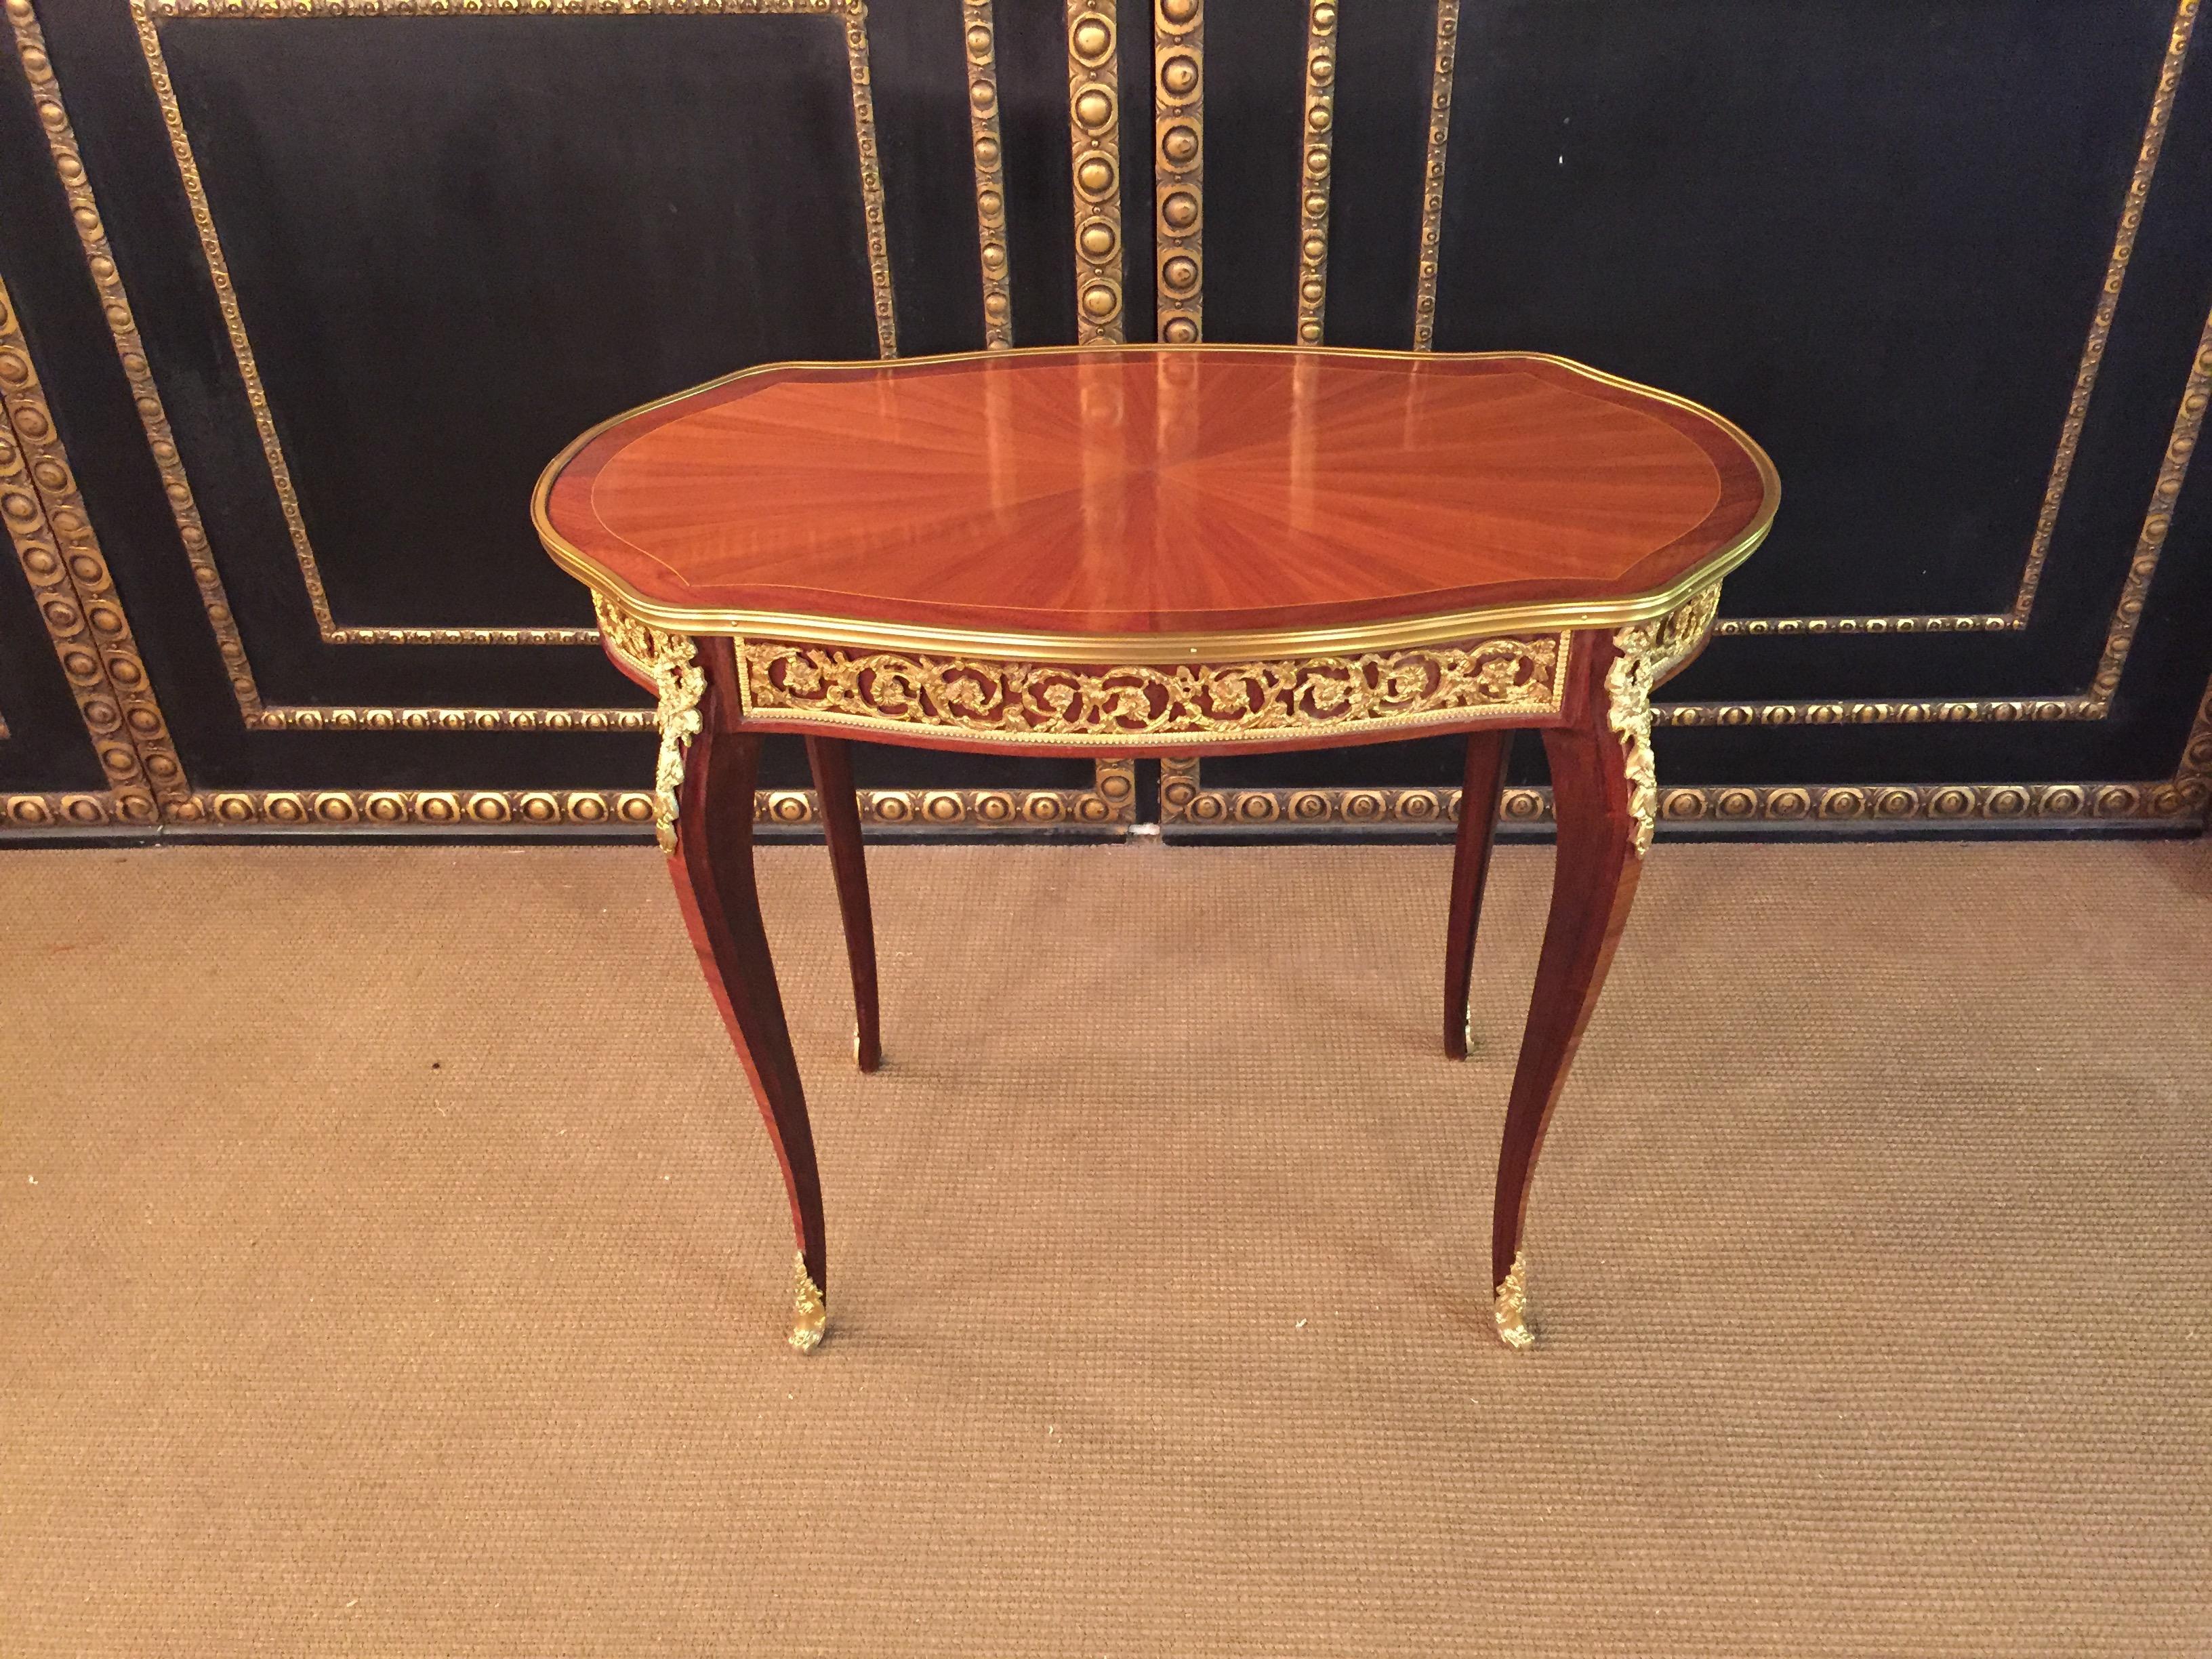 Exclusive French Salon side table in transition style. Rosewood and rosewood on solid beech, slightly convex and concave, carcass, flanked by solid corner straps on high, elegantly curved legs ending in sabots. Of precious woods inlaid with